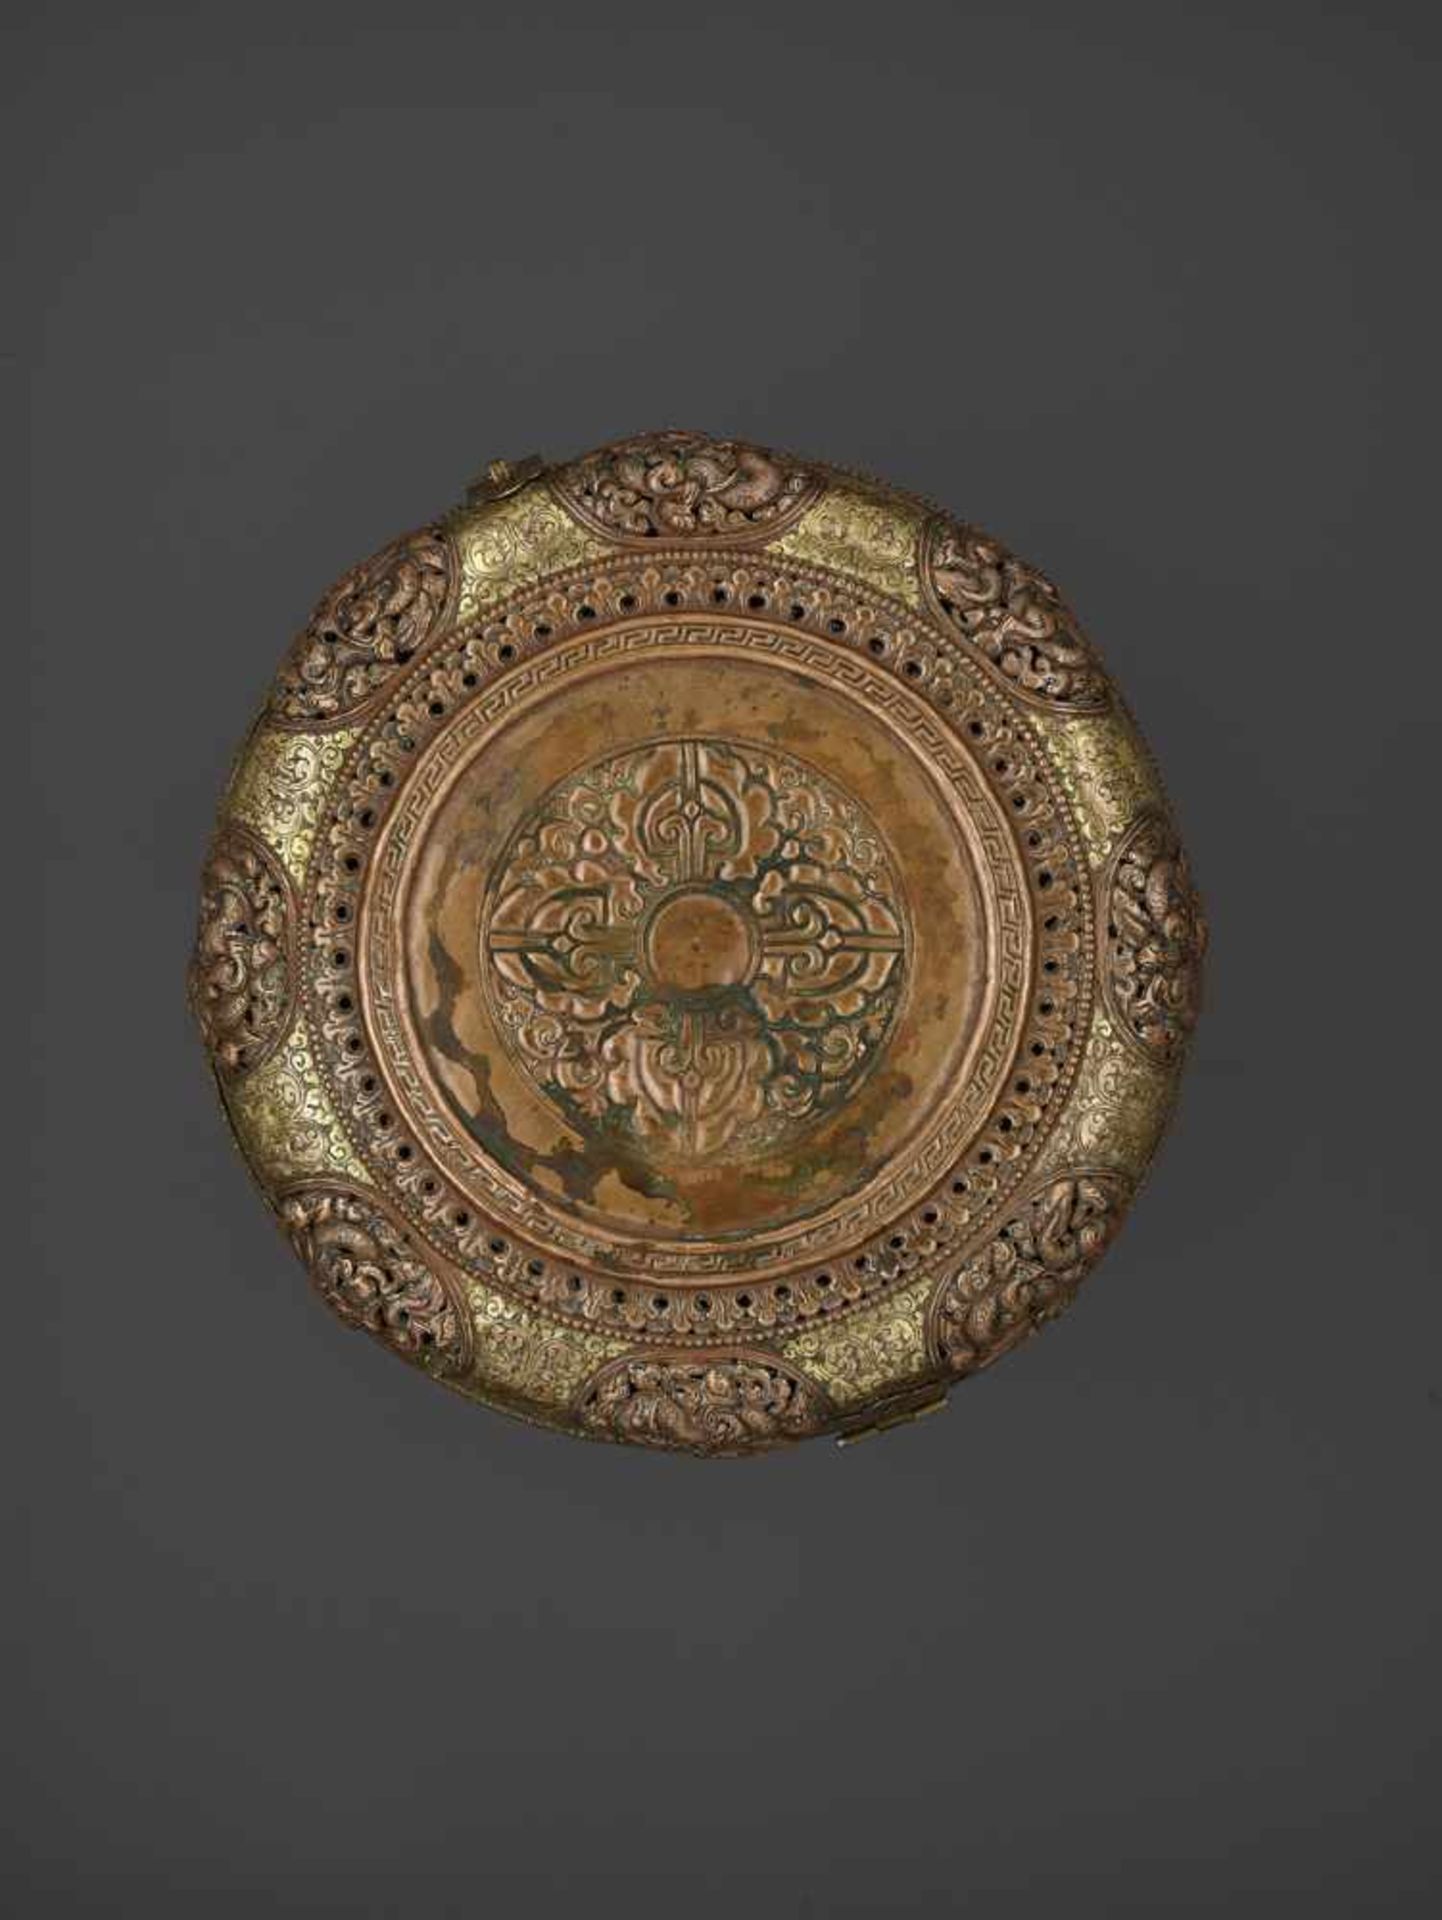 A GILT COPPER REPOUSSÉ RICE CONTAINER Tibet, 17th – 18th century. Finely engraved, embossed and - Image 3 of 9